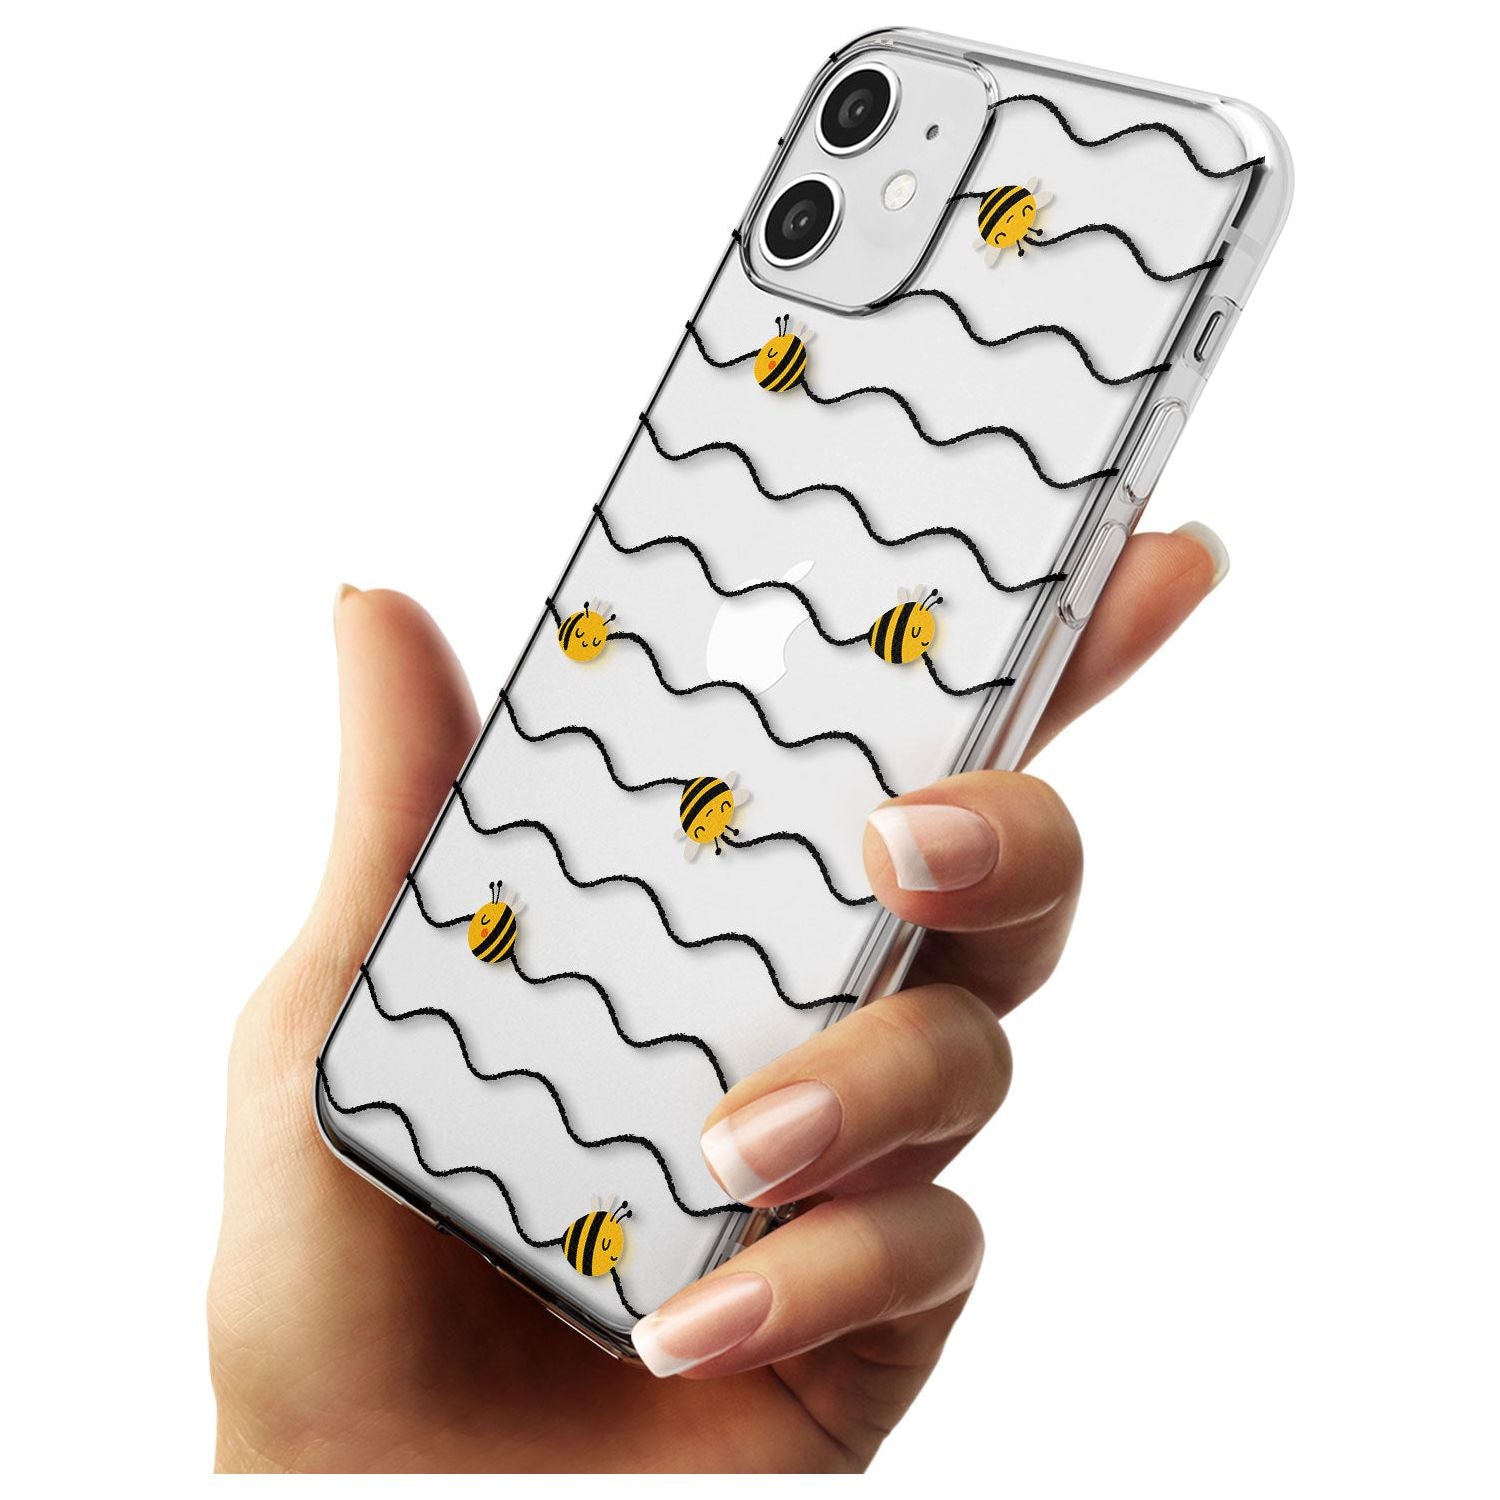 Sweet as Honey Patterns: Bees & Stripes (Clear) Slim TPU Phone Case for iPhone 11